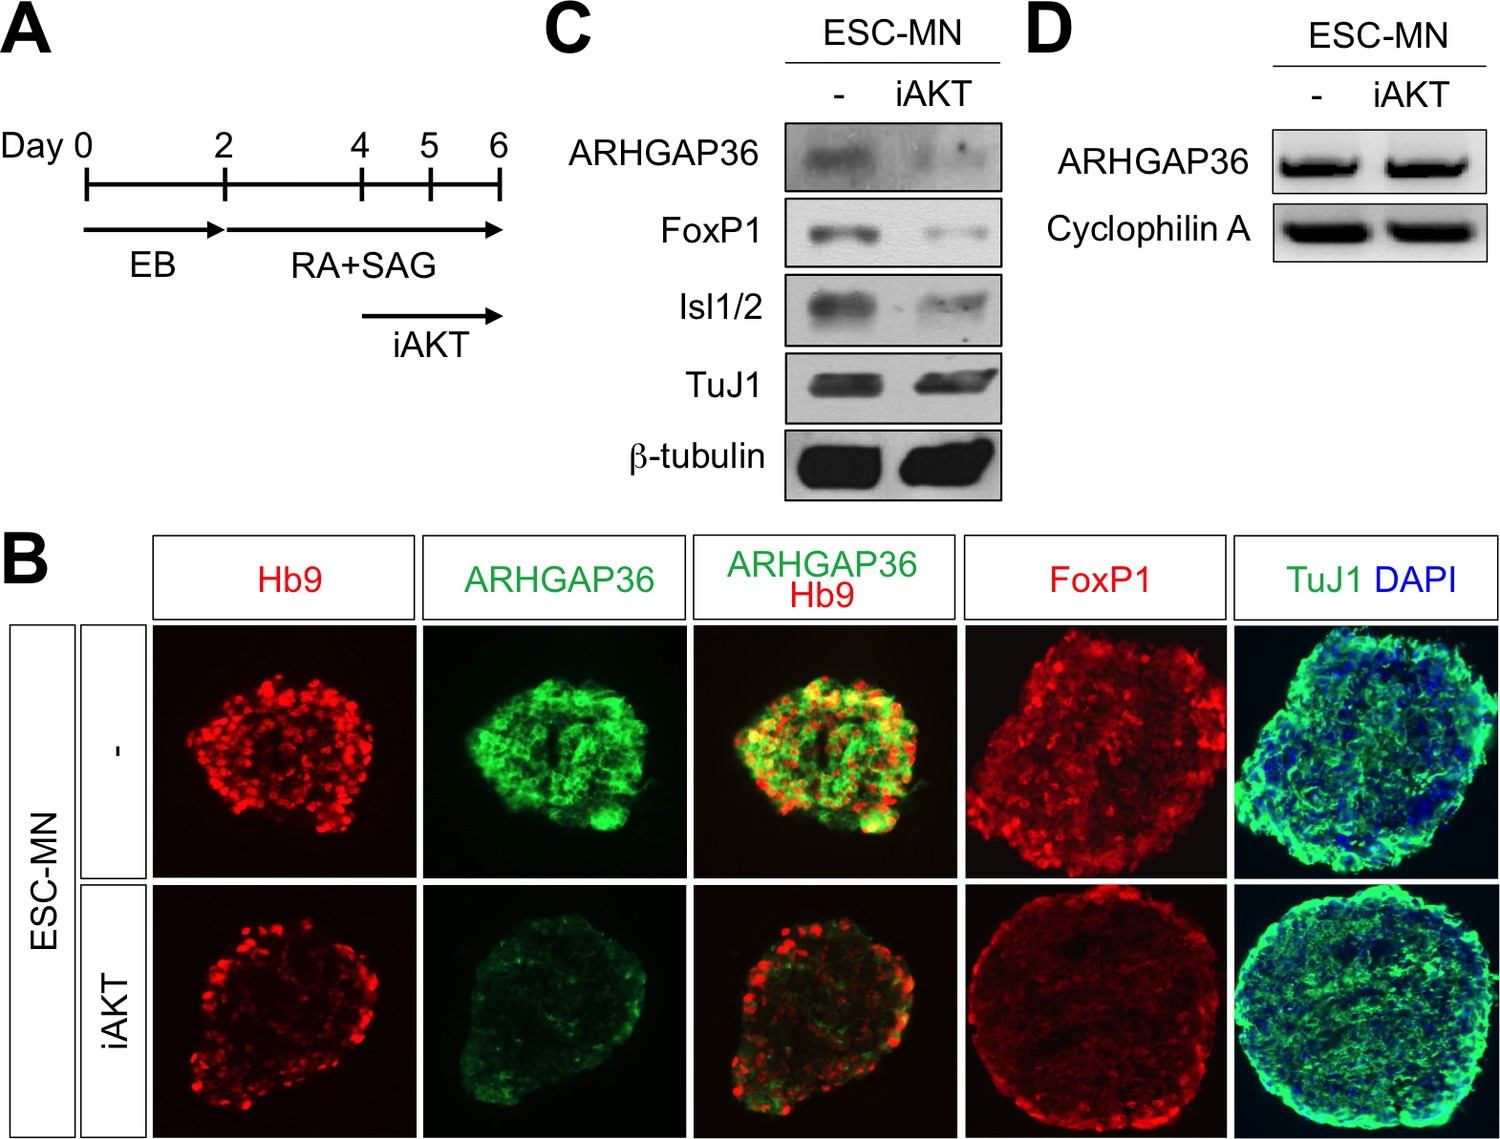 Critical roles of ARHGAP36 as a signal transduction mediator of 